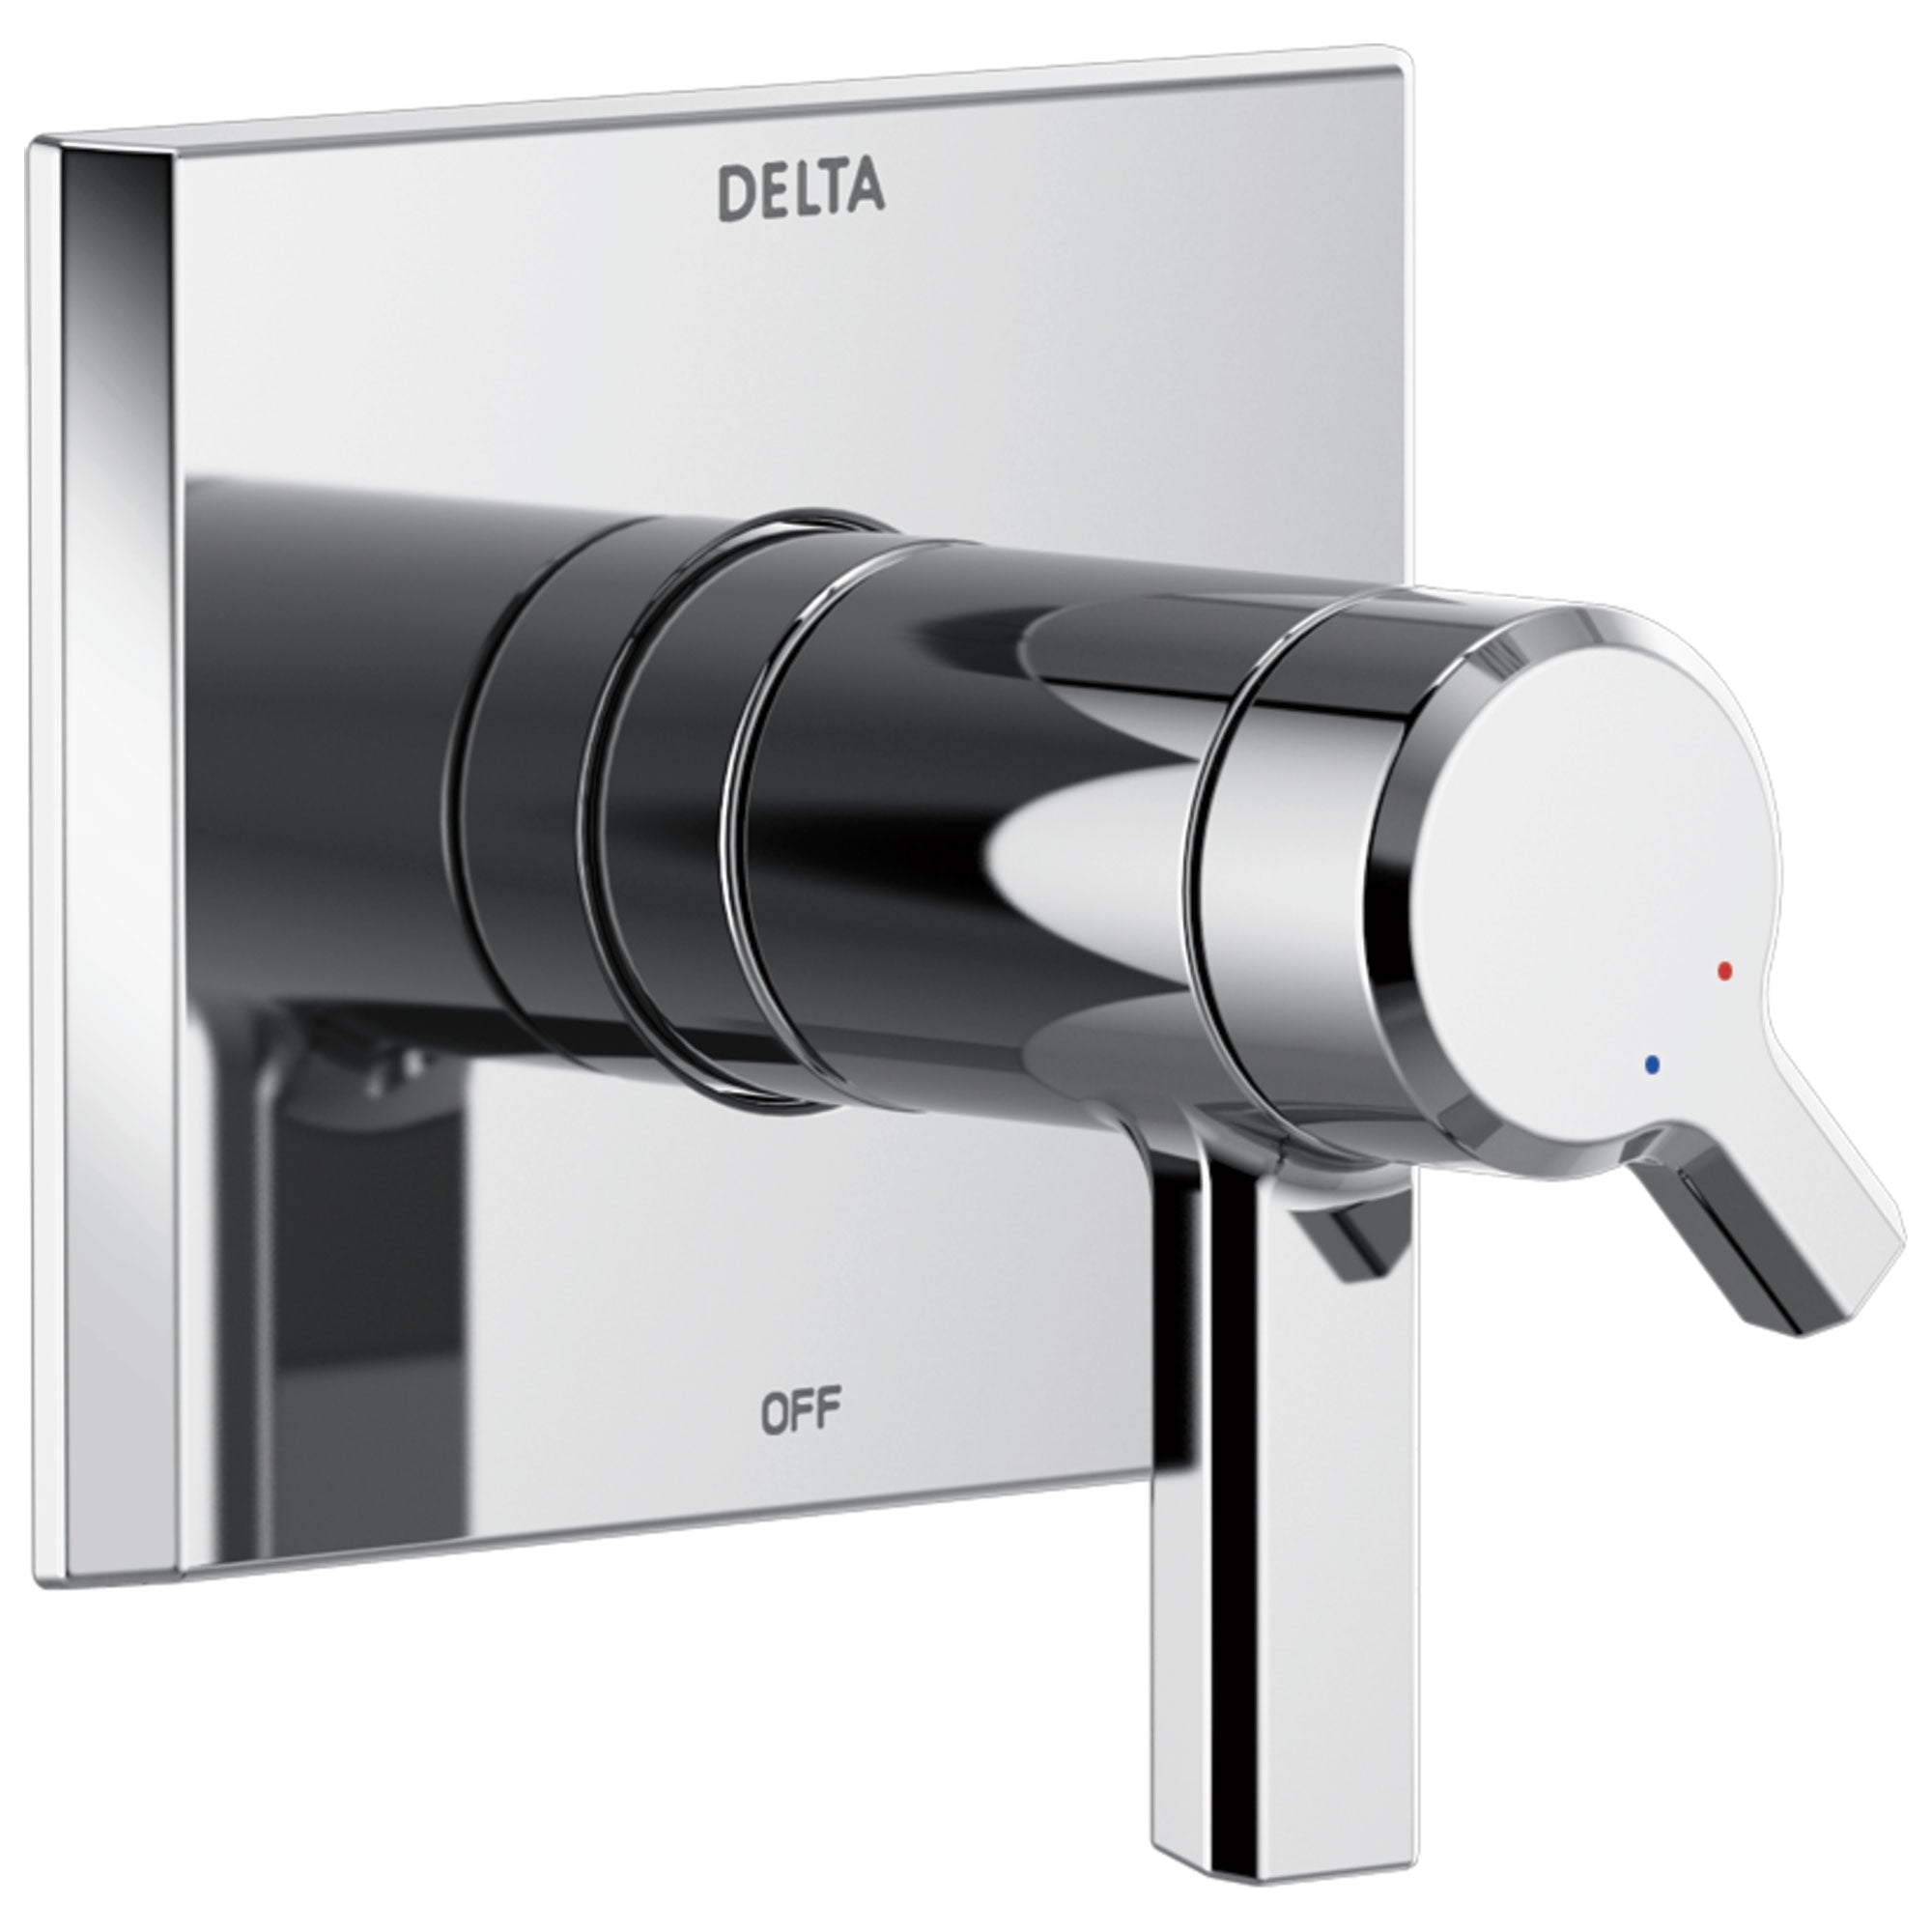 Delta Pivotal Chrome Finish Thermostatic Shower Faucet Dual Handle Control Includes 17T Cartridge, Handles, and Valve without Stops D3307V